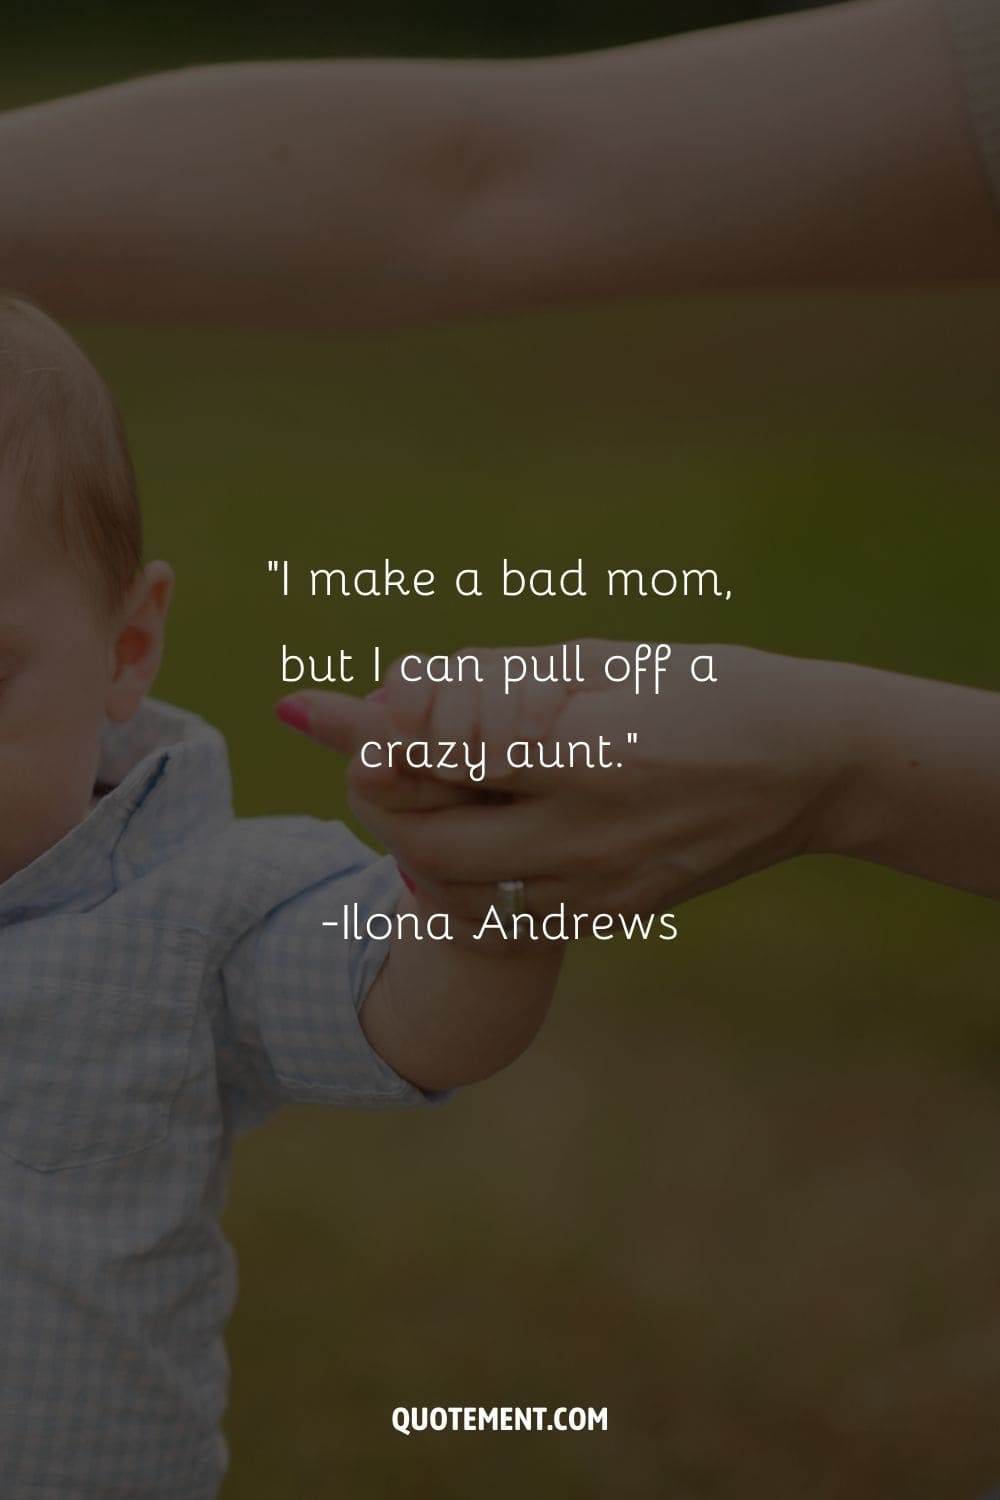 Aunt provides loving care to the infant.